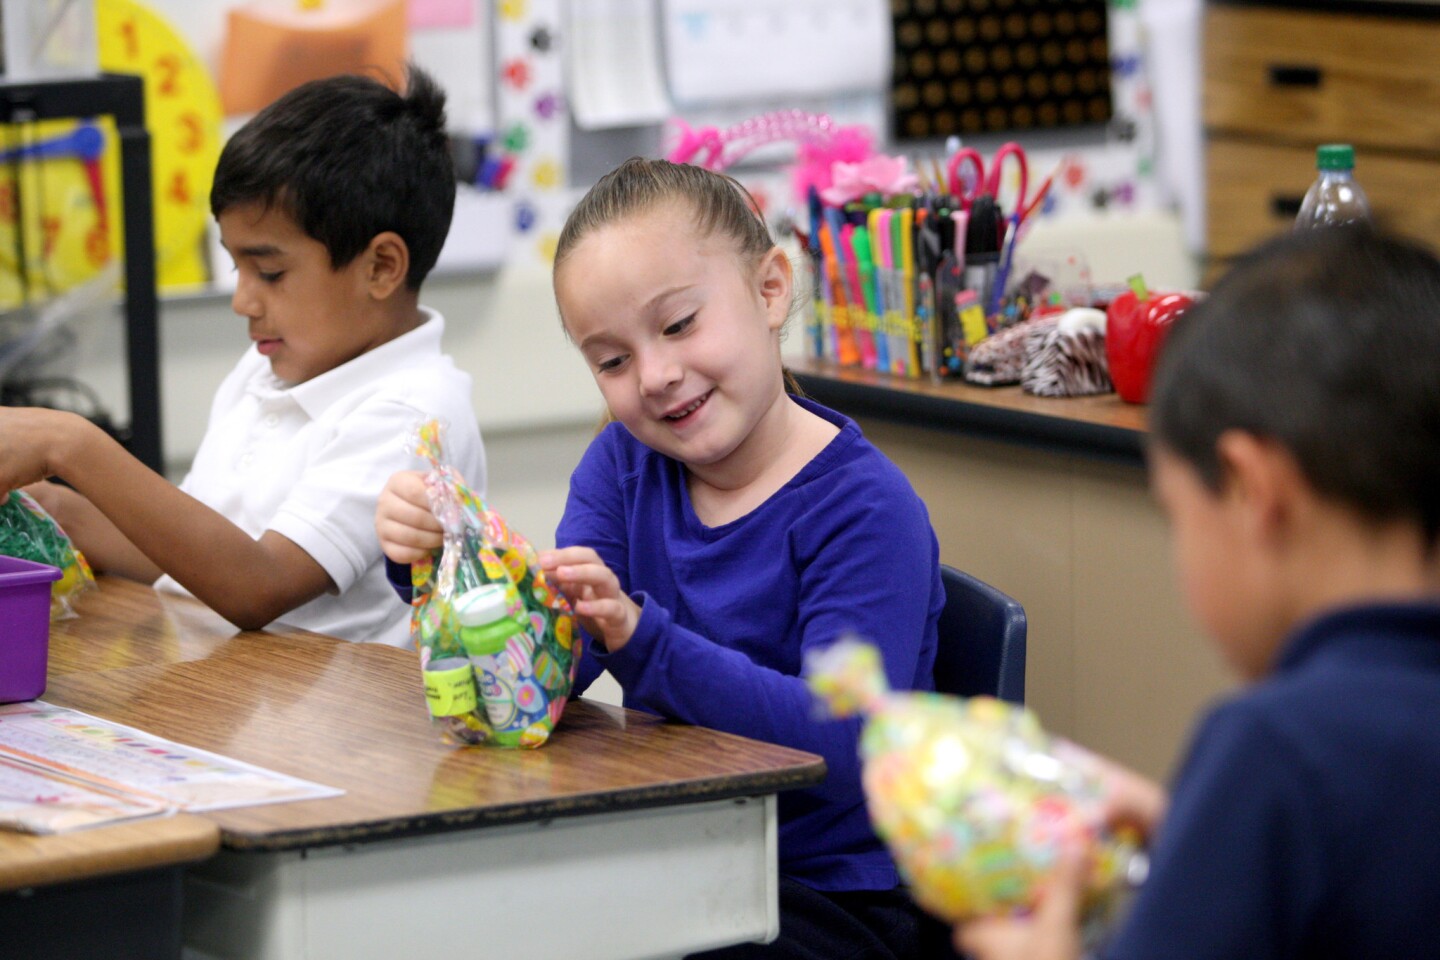 First-grader Michelle Solorzano looks at the Easter goody bag she and other students received from Glendale police officers, at Cerritos Elementary School, in Glendale on Tuesday, March 15, 2016. The Cops for Kids program brings local students goody bags at certain times of the year. Students at the school received goody bags which included Glendale Police safety items and some plastic easter eggs with candy.